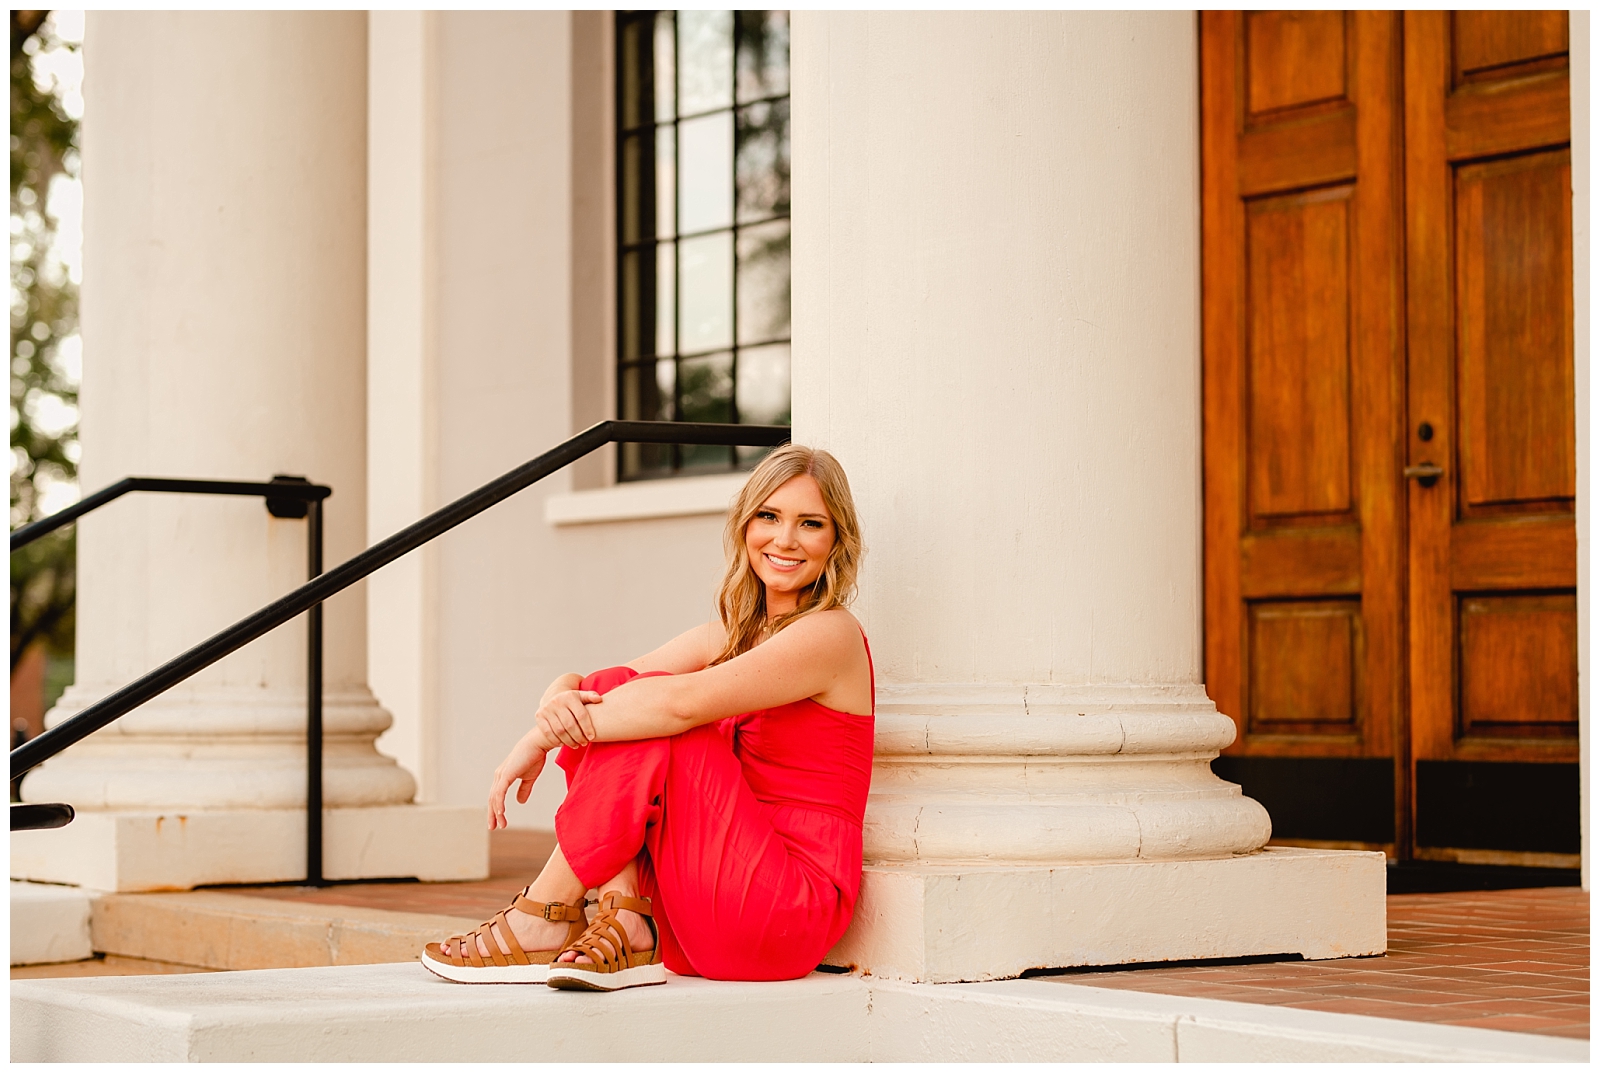 High School Senior takes pictures by old courthouse in bright red jumpsuit in Thomasville, Georgia.